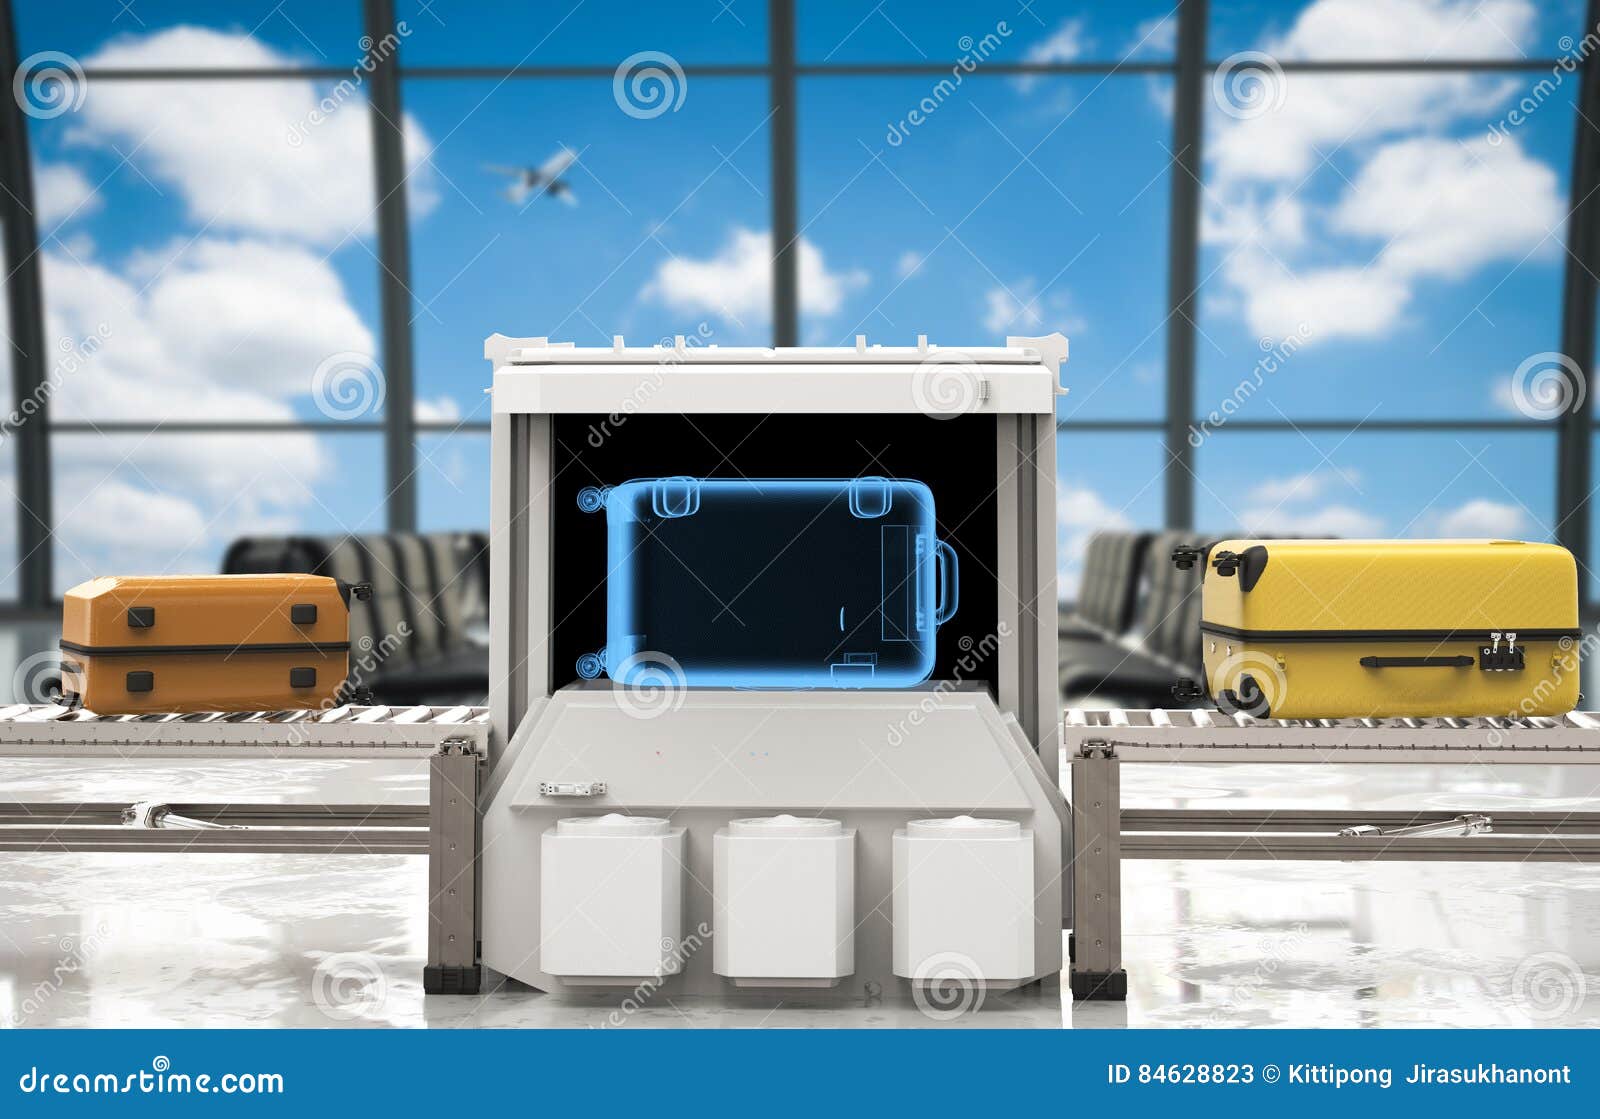 970 Airport Luggage Scan Stock Photos Pictures  RoyaltyFree Images   iStock